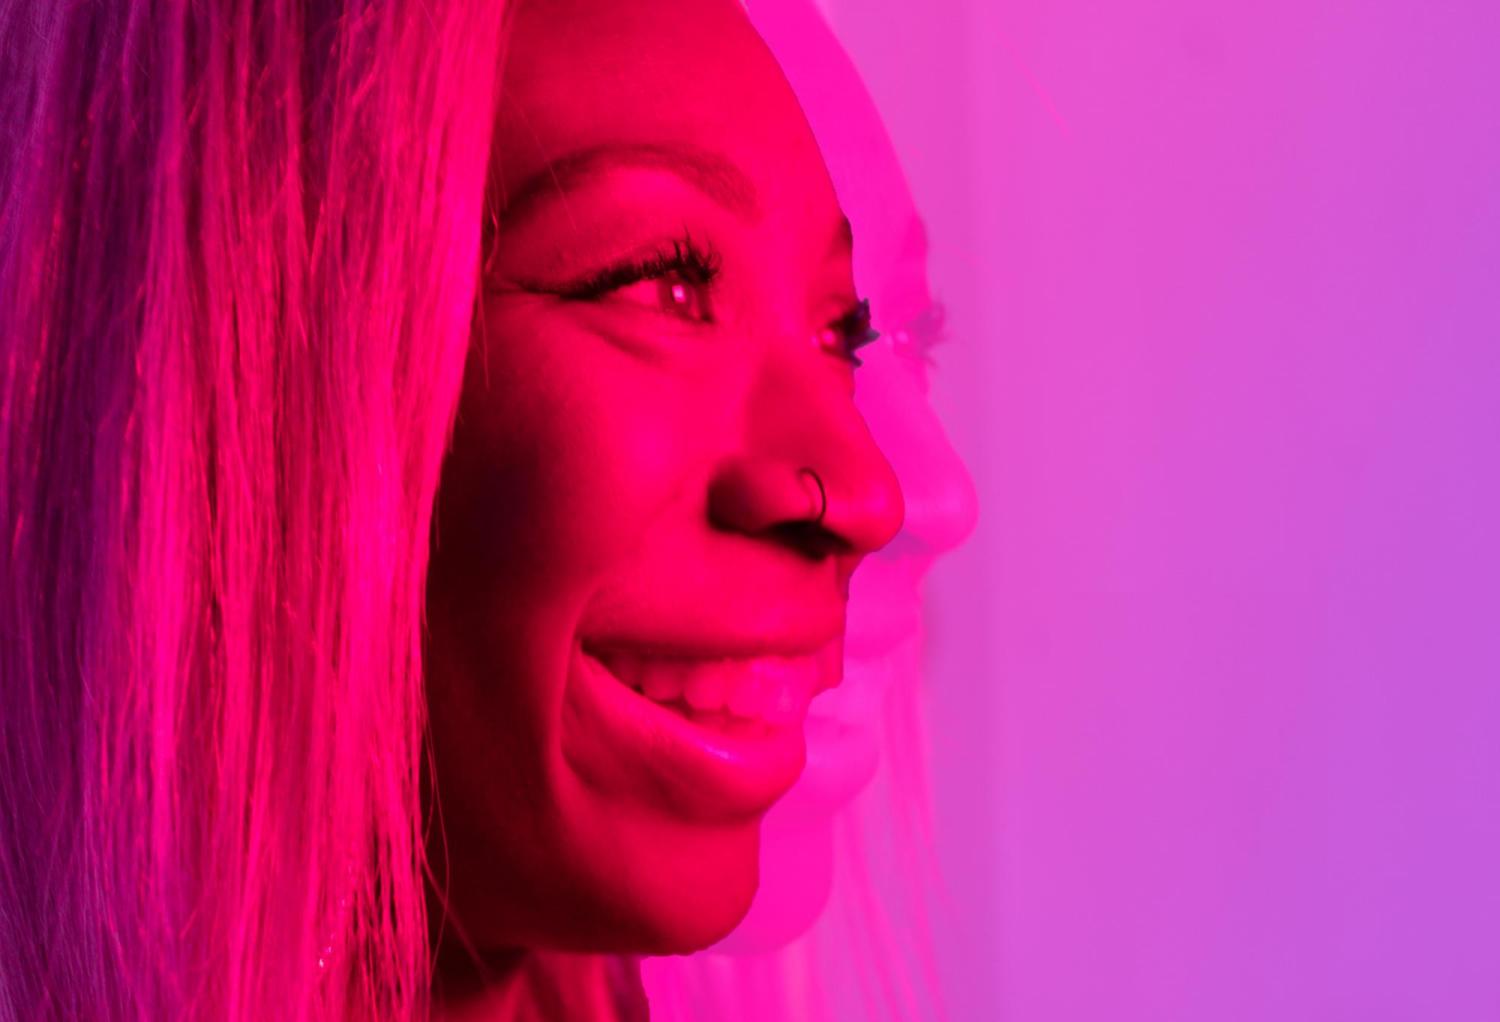 Woman smiling in a pink lit room